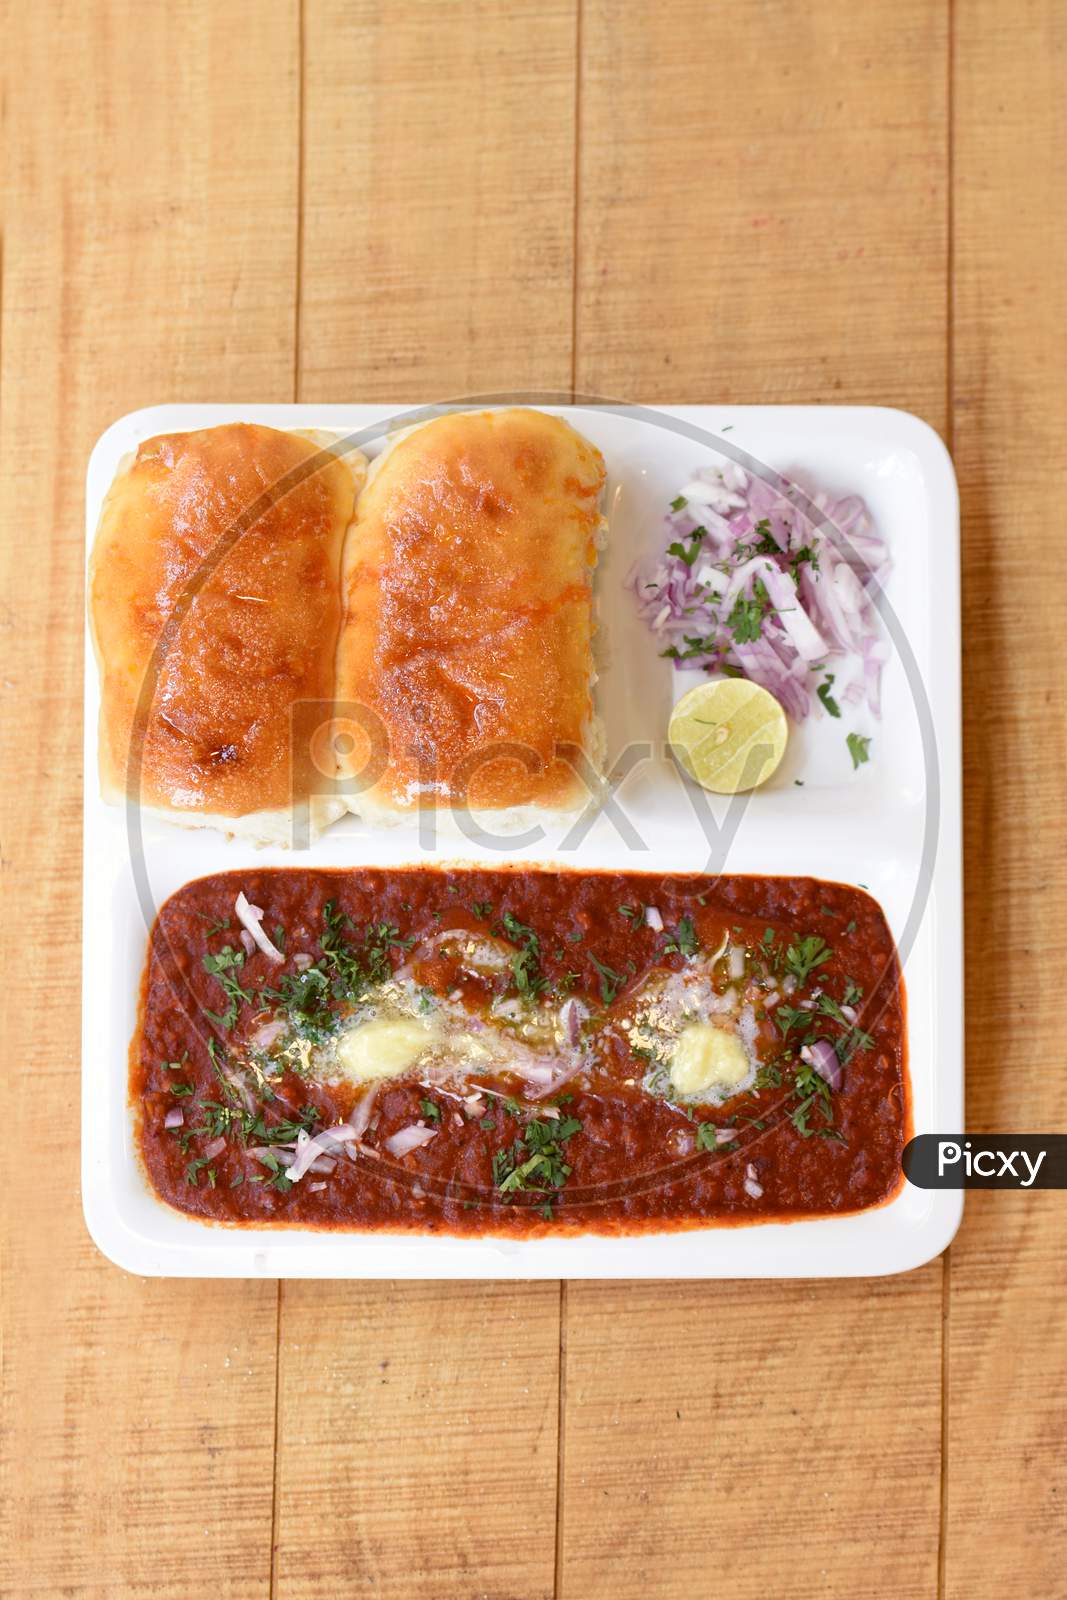 Indian Delicious Pav Bhaji With Onion And Coriander Spread On Top Of Curry Wheat Bread Pav Bhaji Fast Food Dish From India.